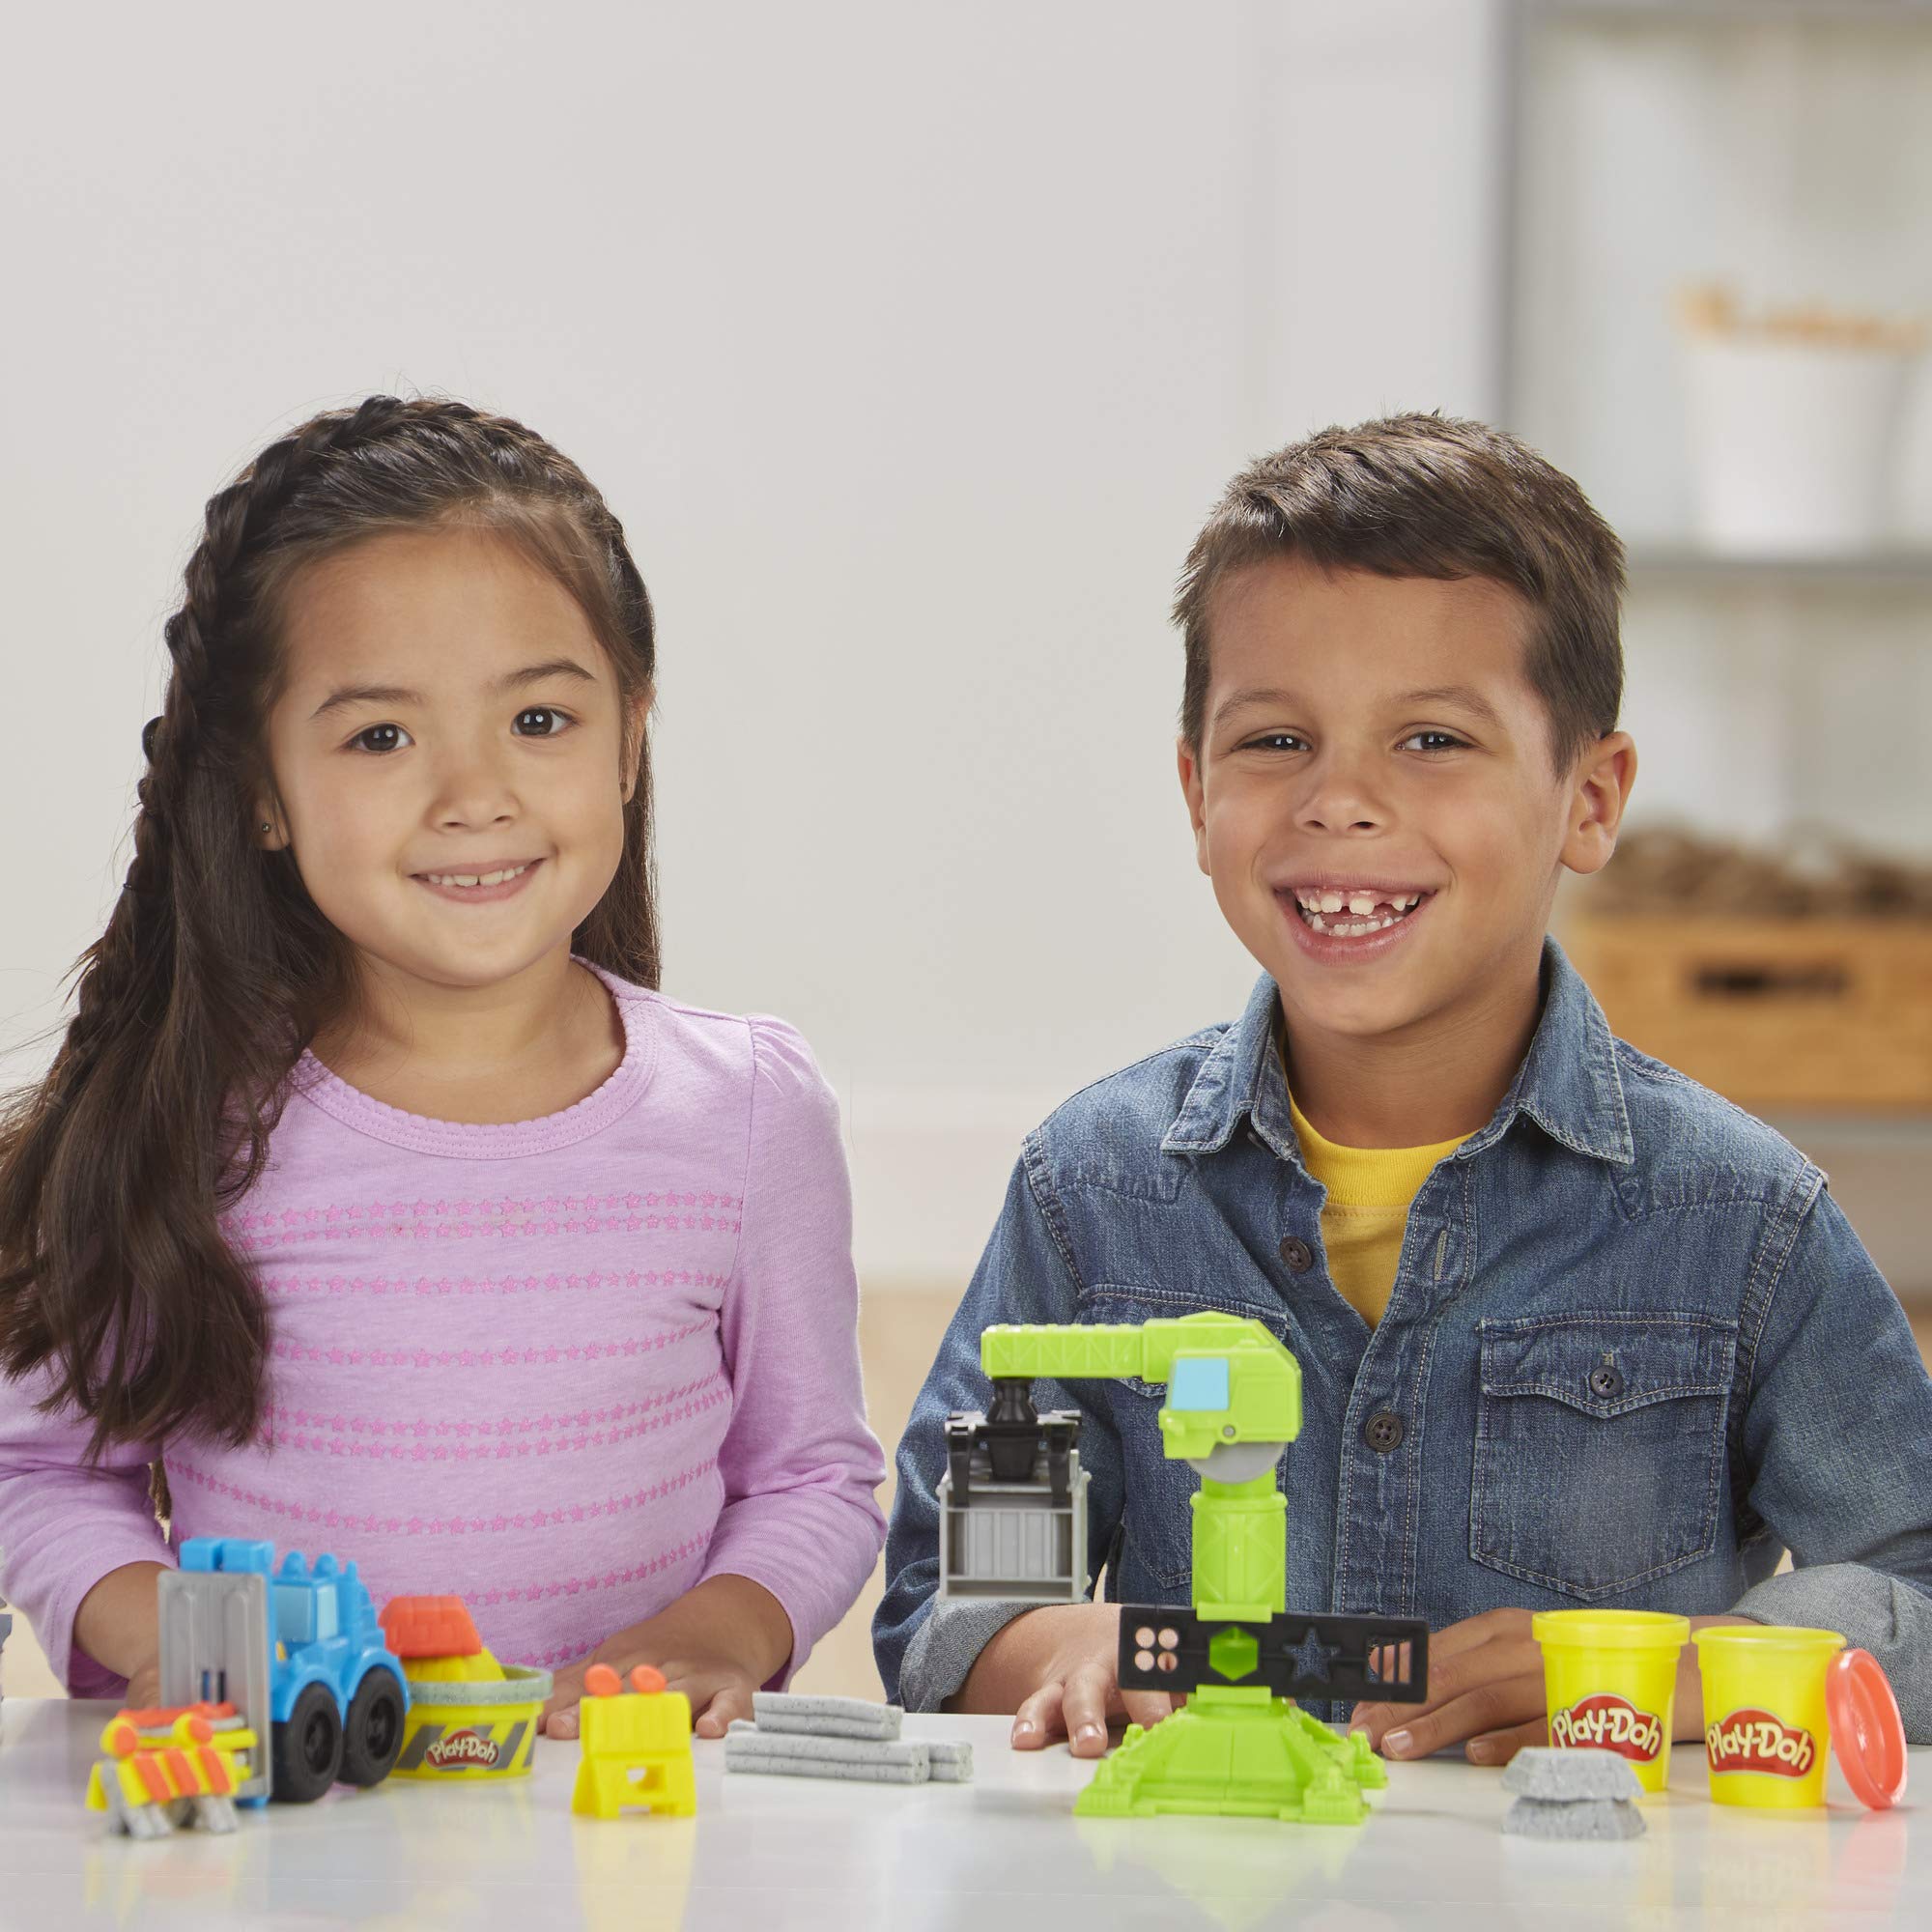 Play-Doh Wheels Crane and Forklift Construction Toys with Non-Toxic Cement Buildin' Compound Plus 2 Additional Colors